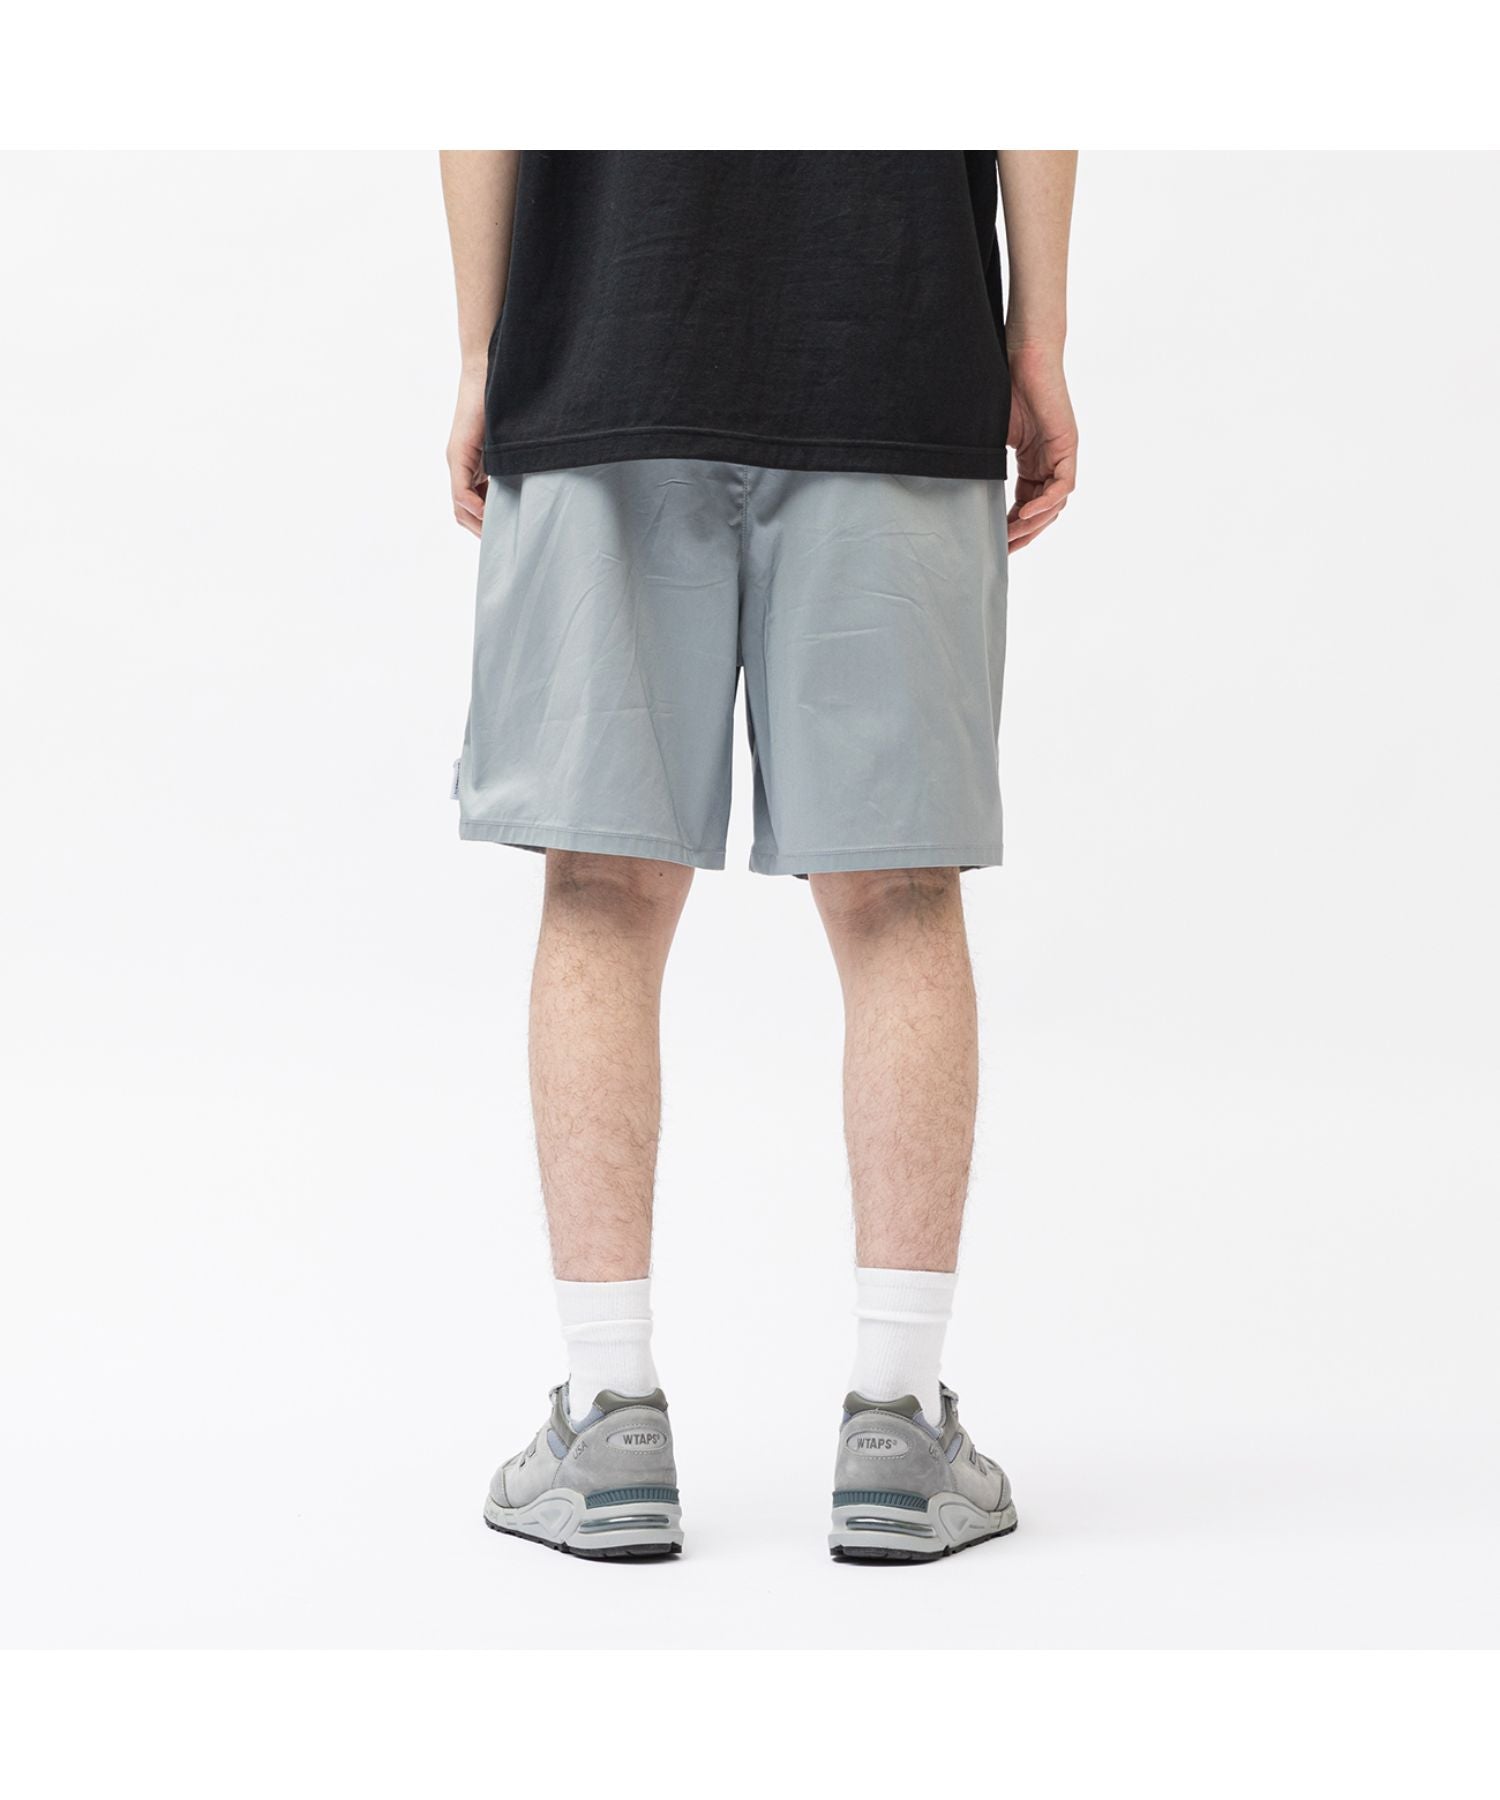 wtaps SPSS 2002 SHORTS